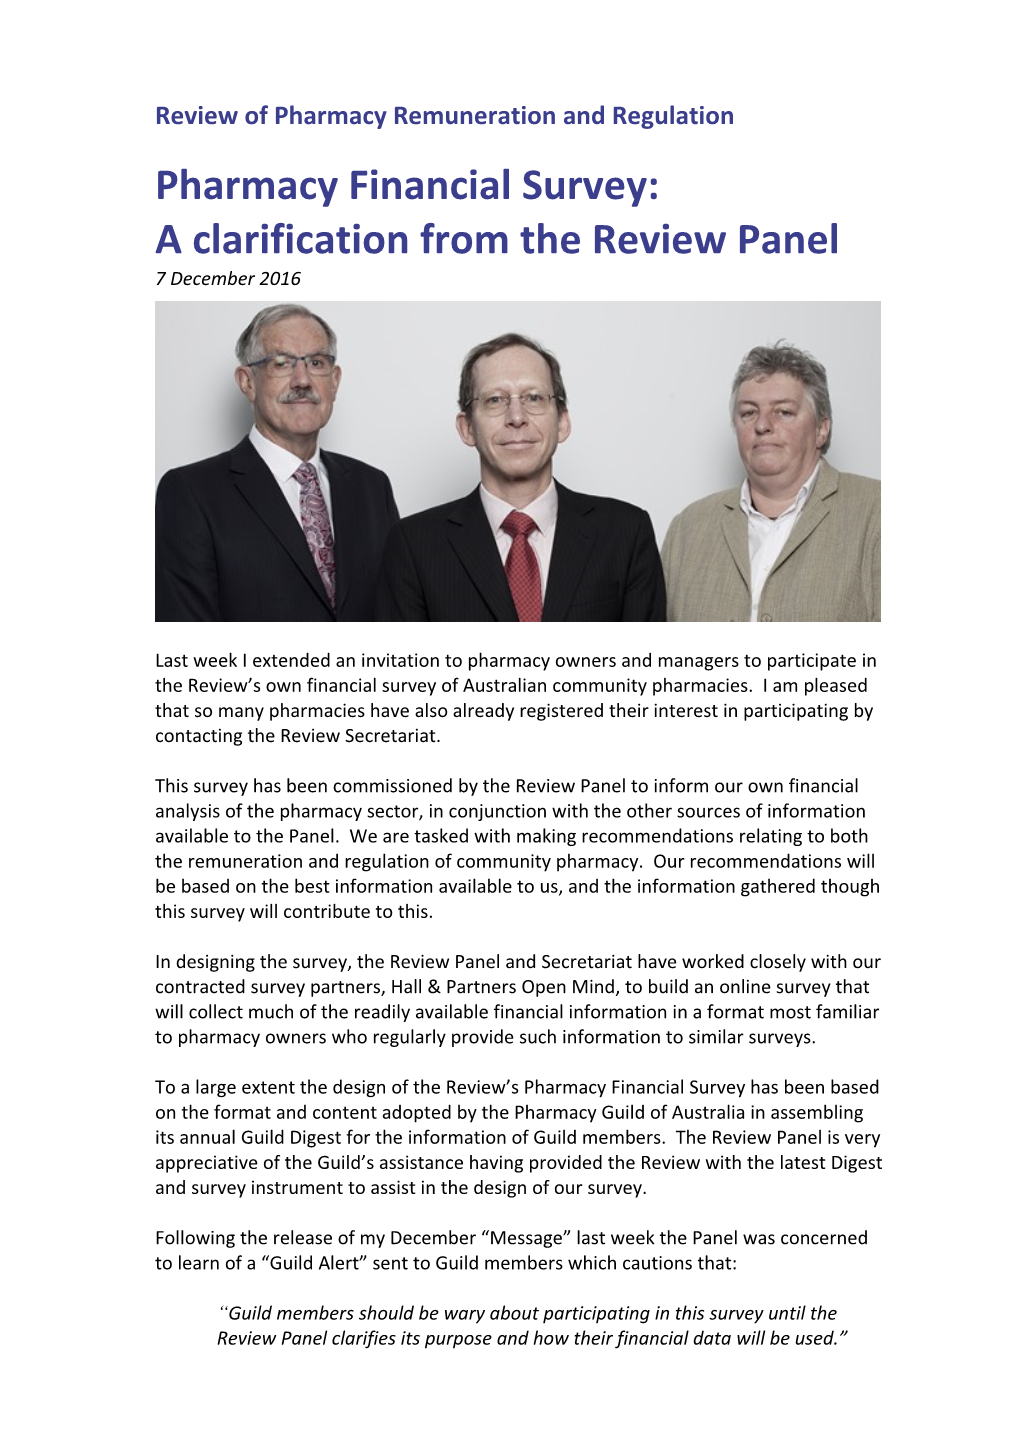 Review of Pharmacy Remuneration and Regulation s1